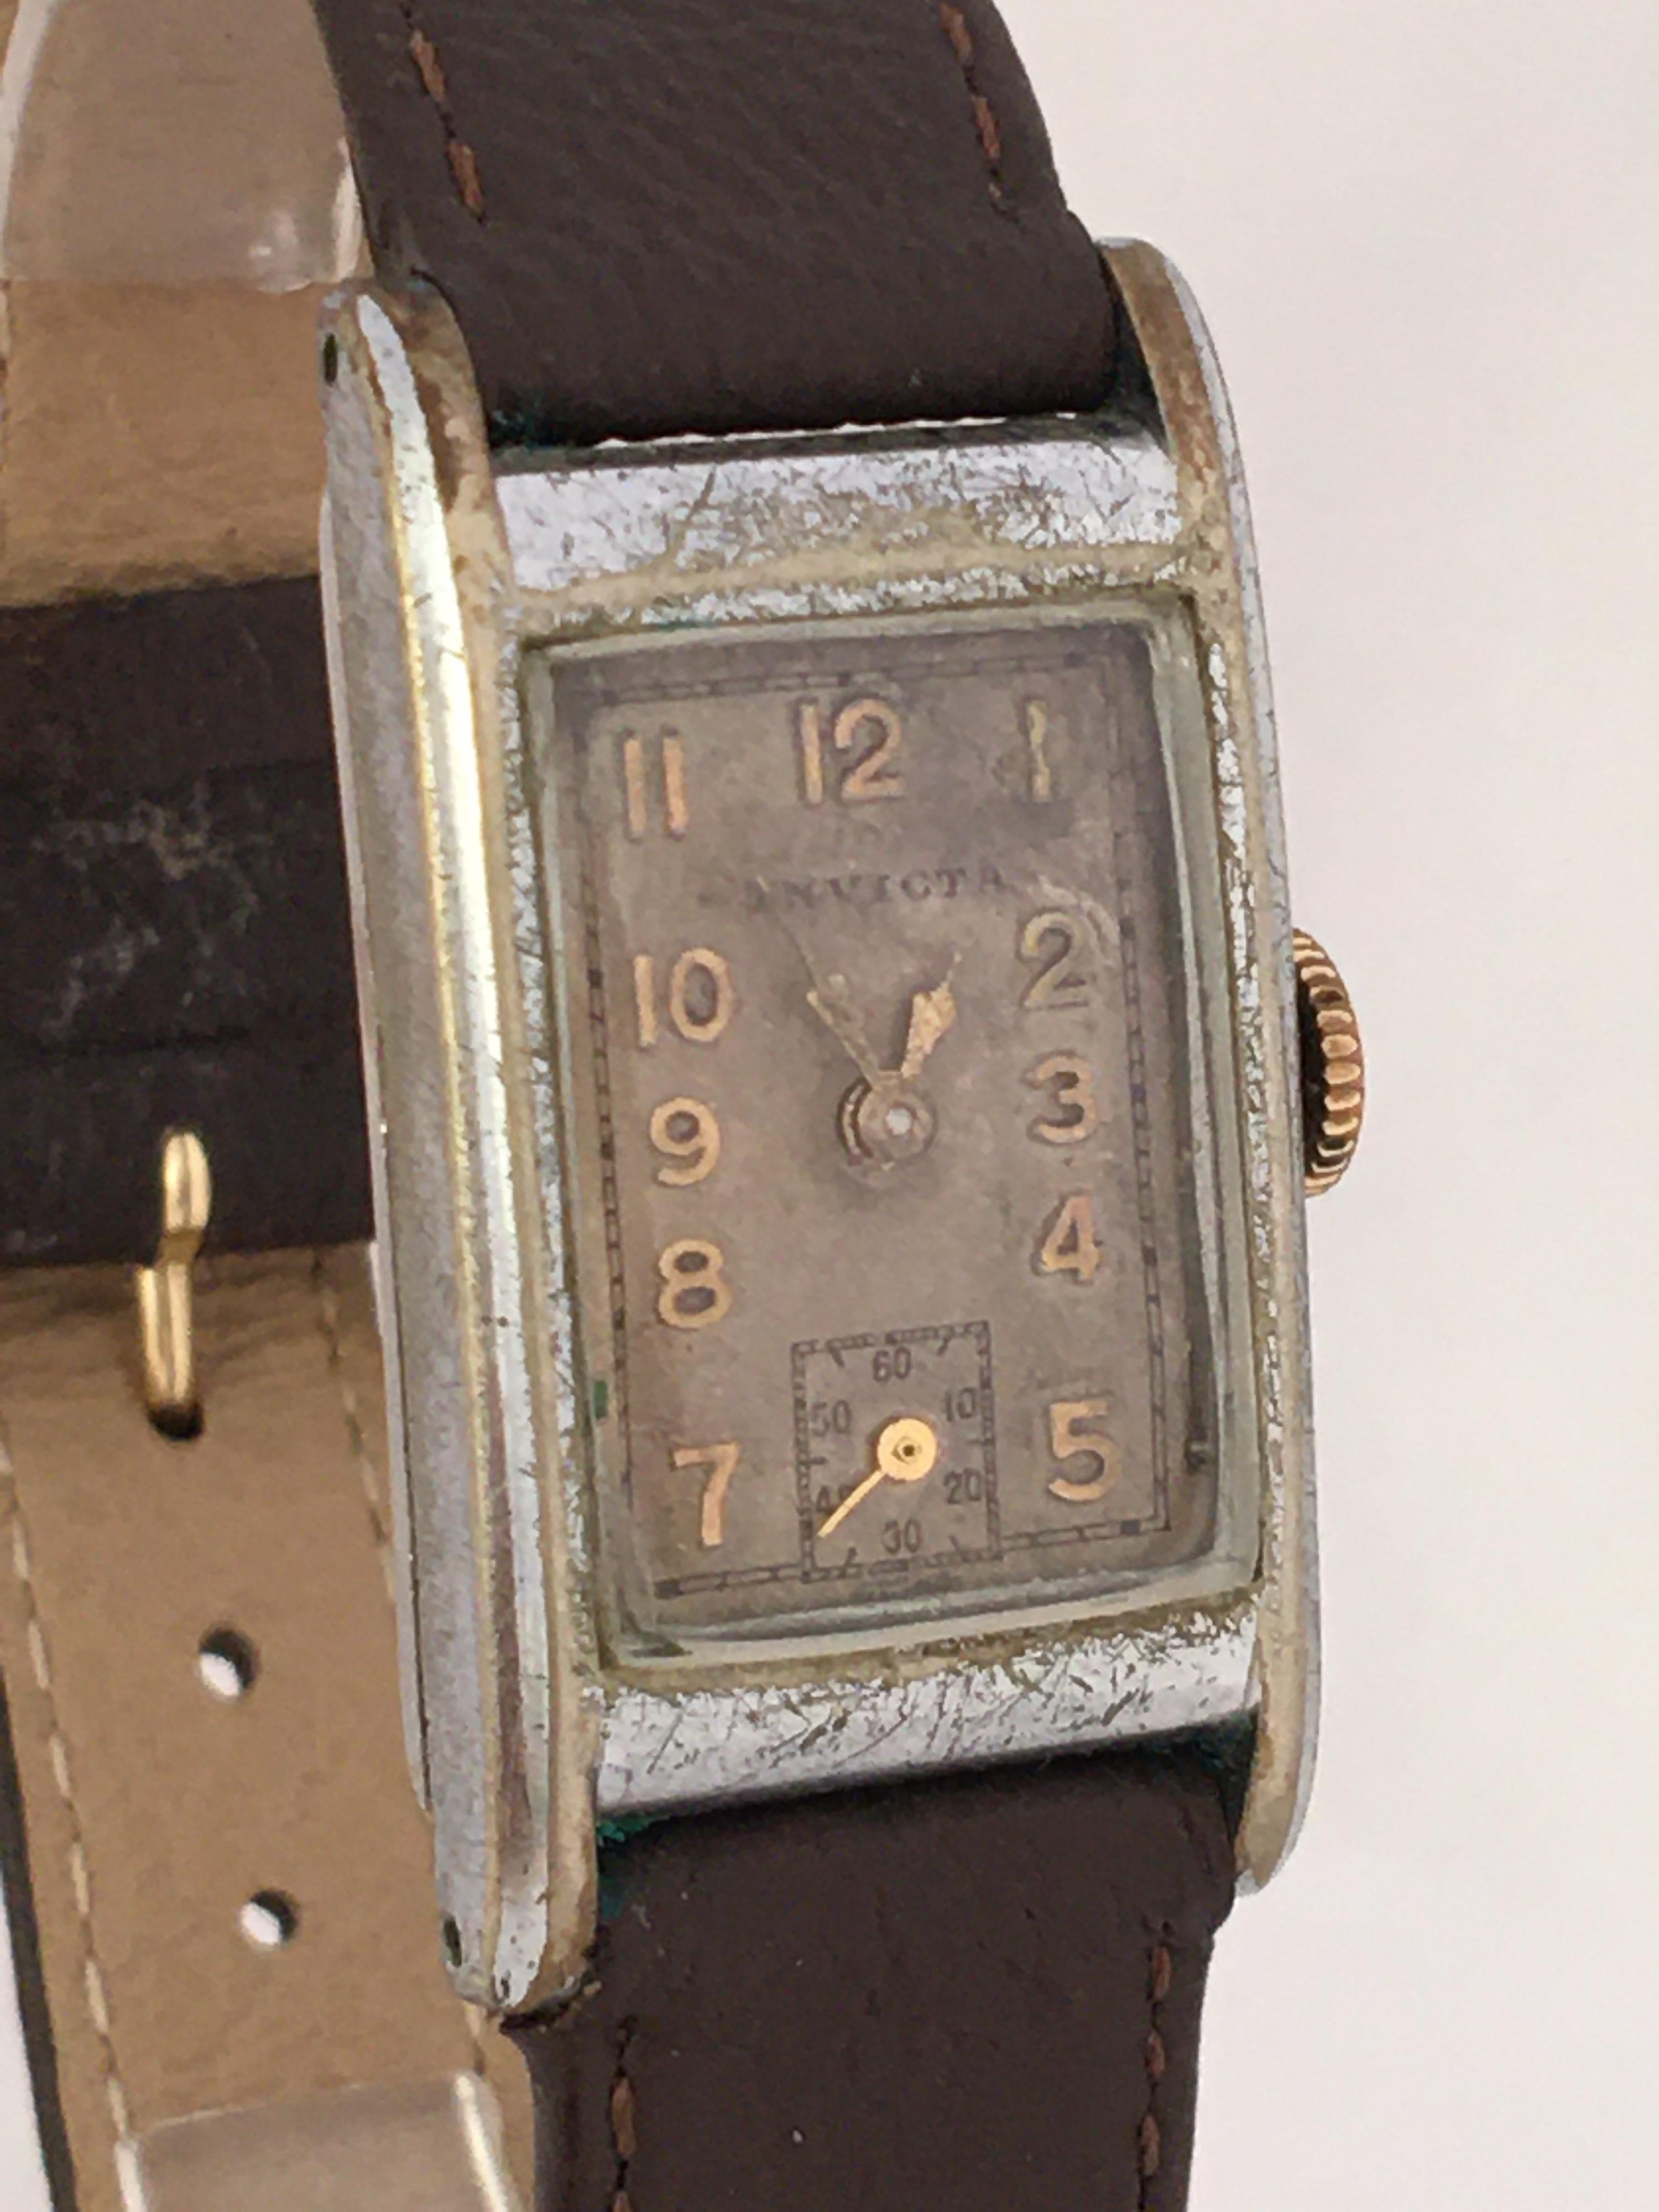 This pre-owned vintage hand winding watch is in good working condition and it is running well. Visible signs of ageing and and some wear on the dial. The silver plated watch case is tarnished as shown. Some light and small scratches on the glass and